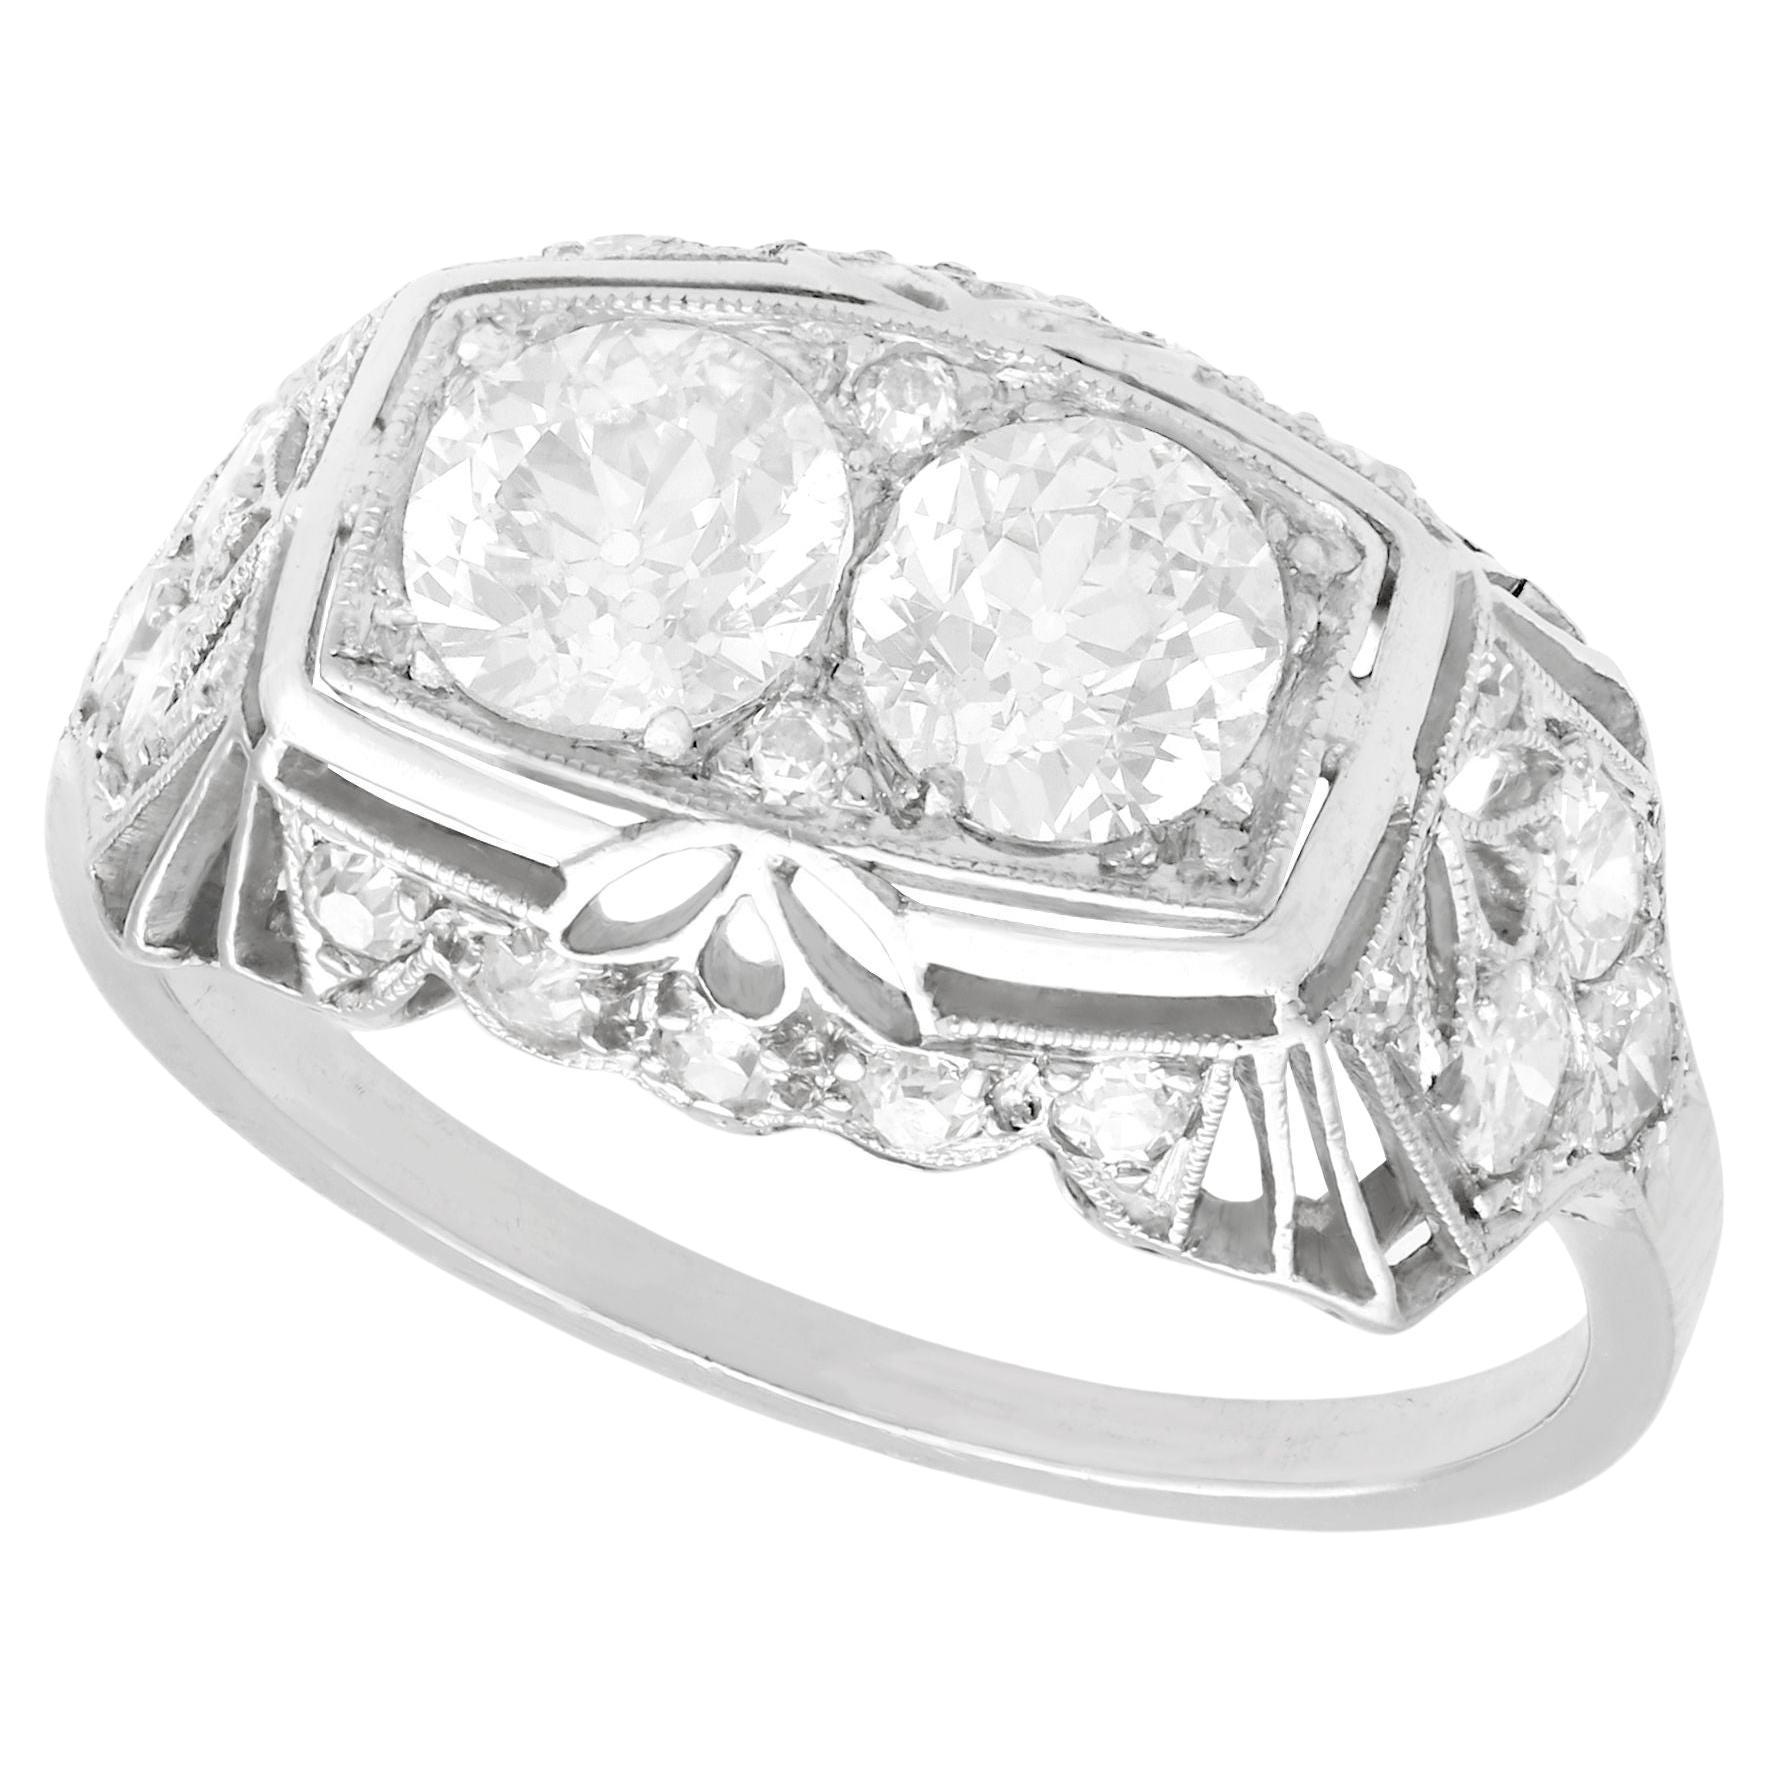 1940s 1.73 Carat Diamond and Platinum Cocktail Ring For Sale